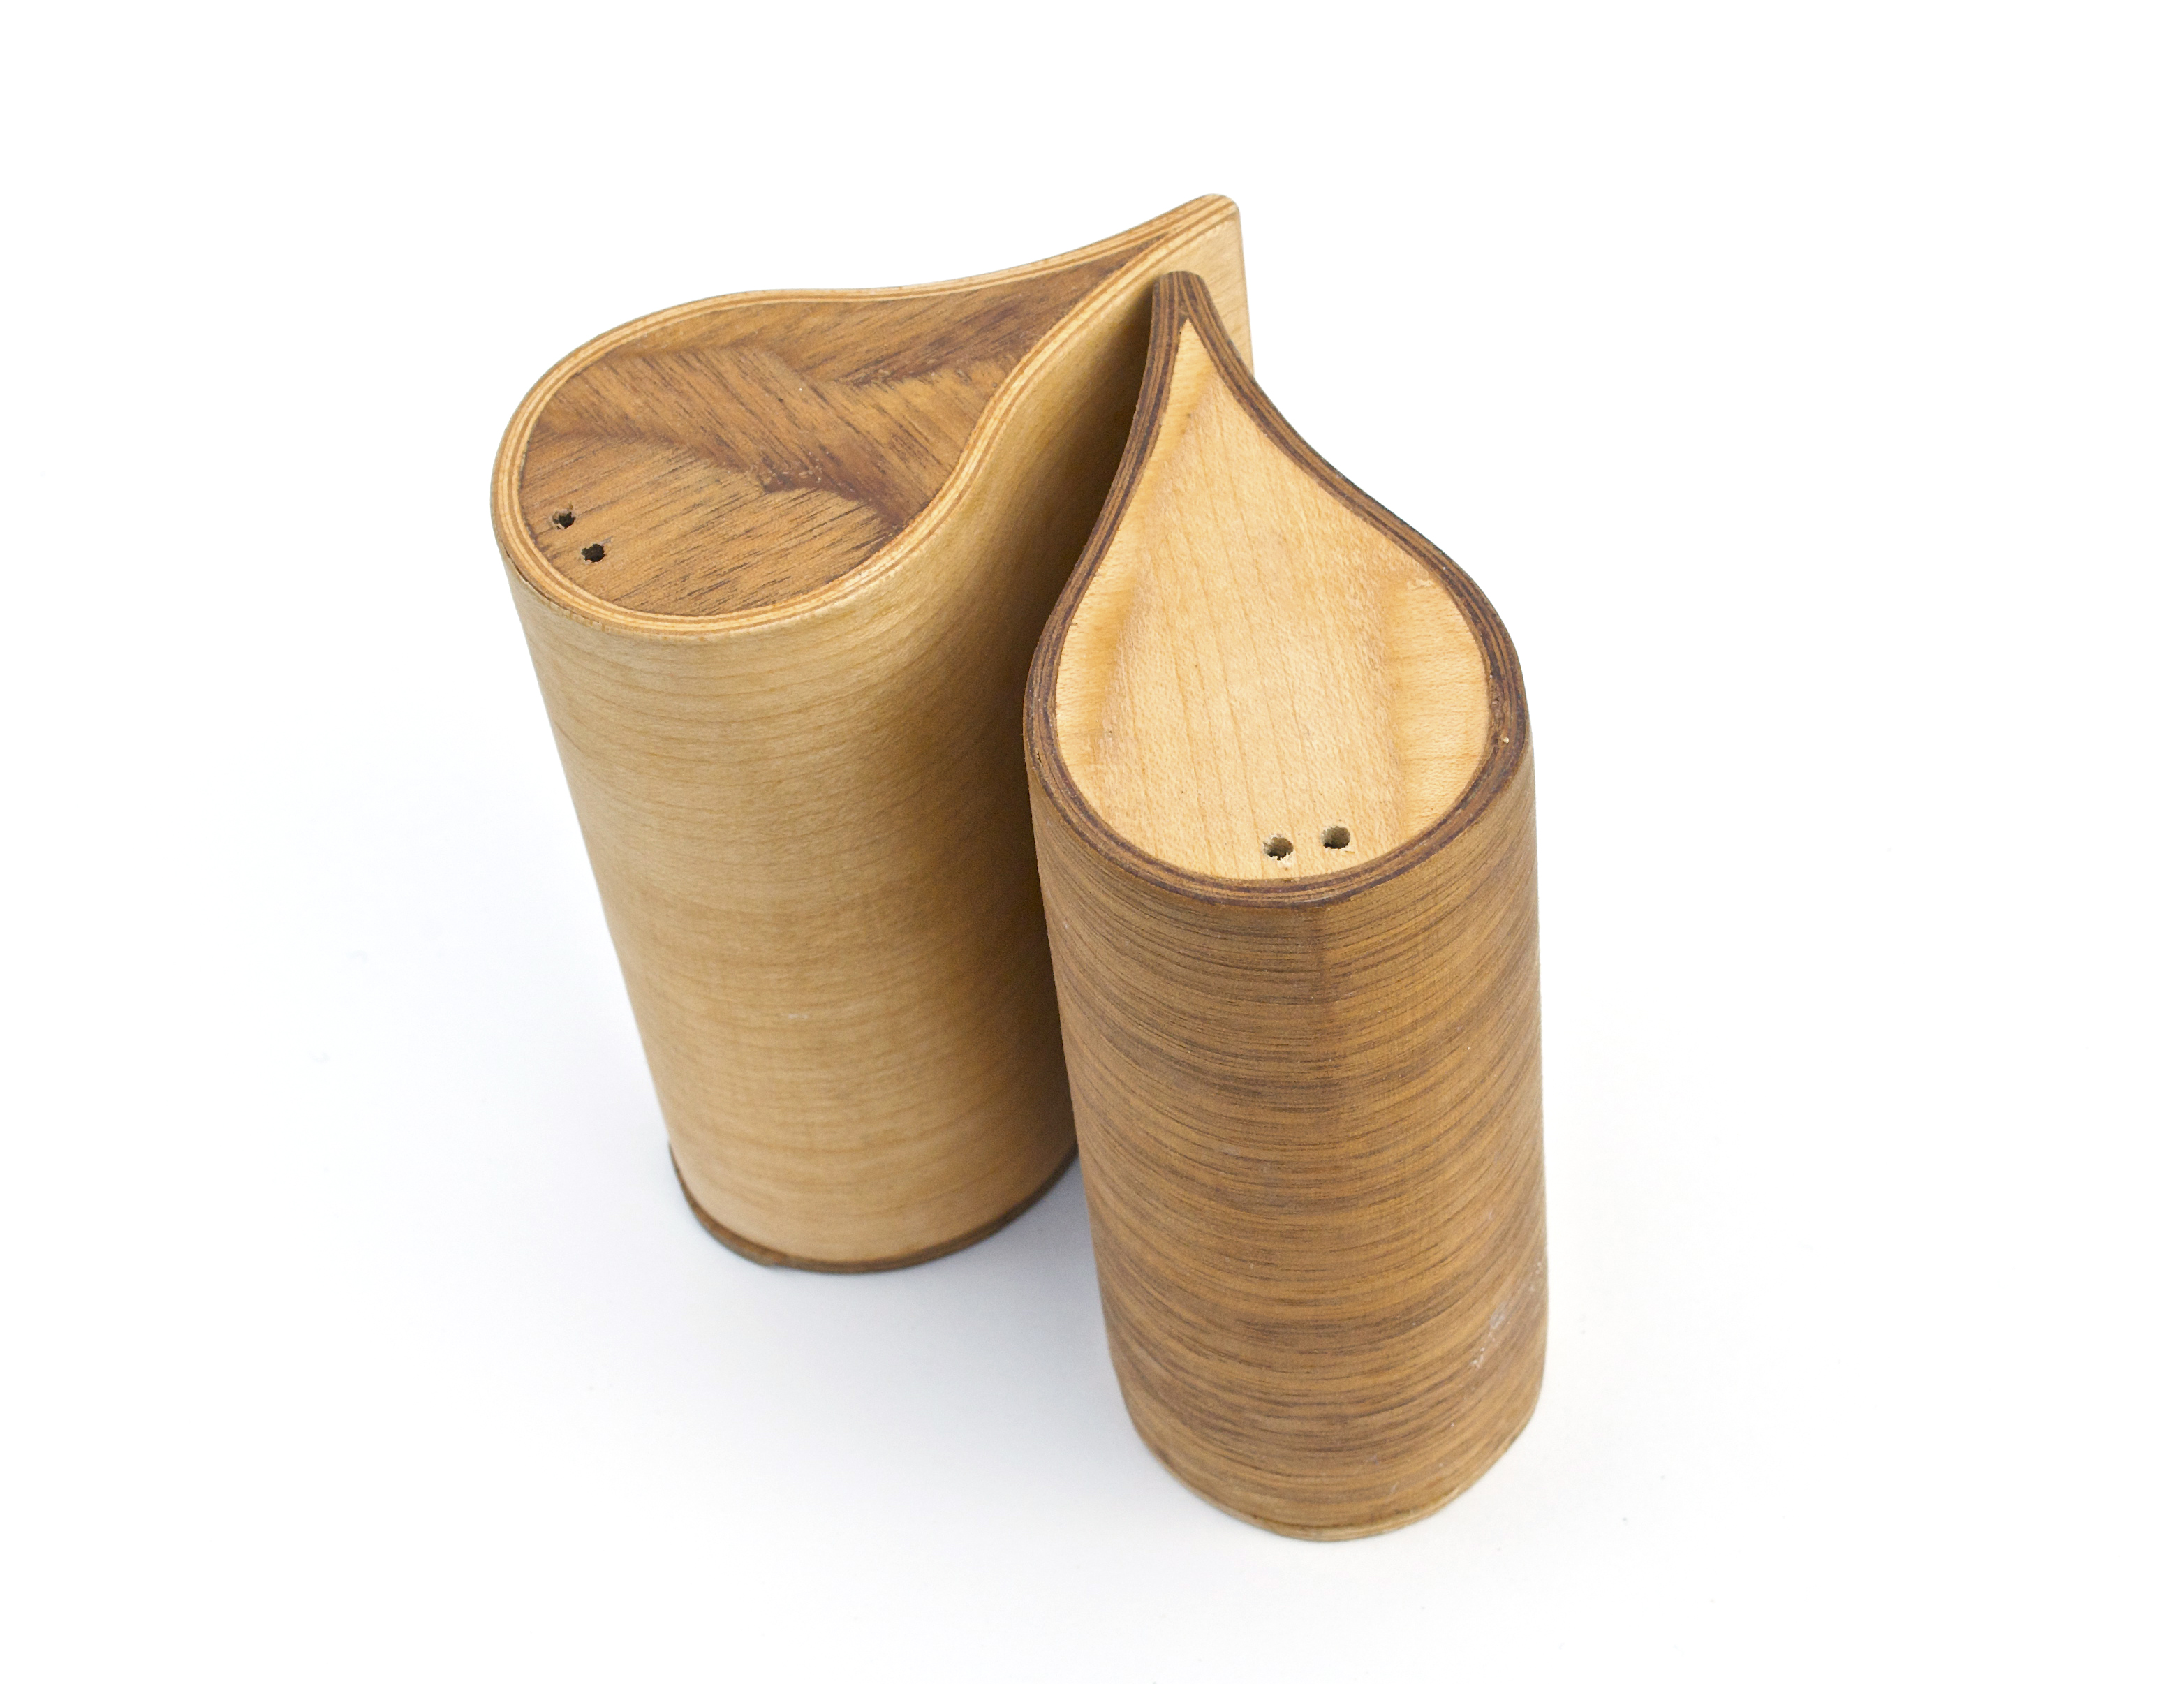 Bent lamination salt and pepper shakers. 